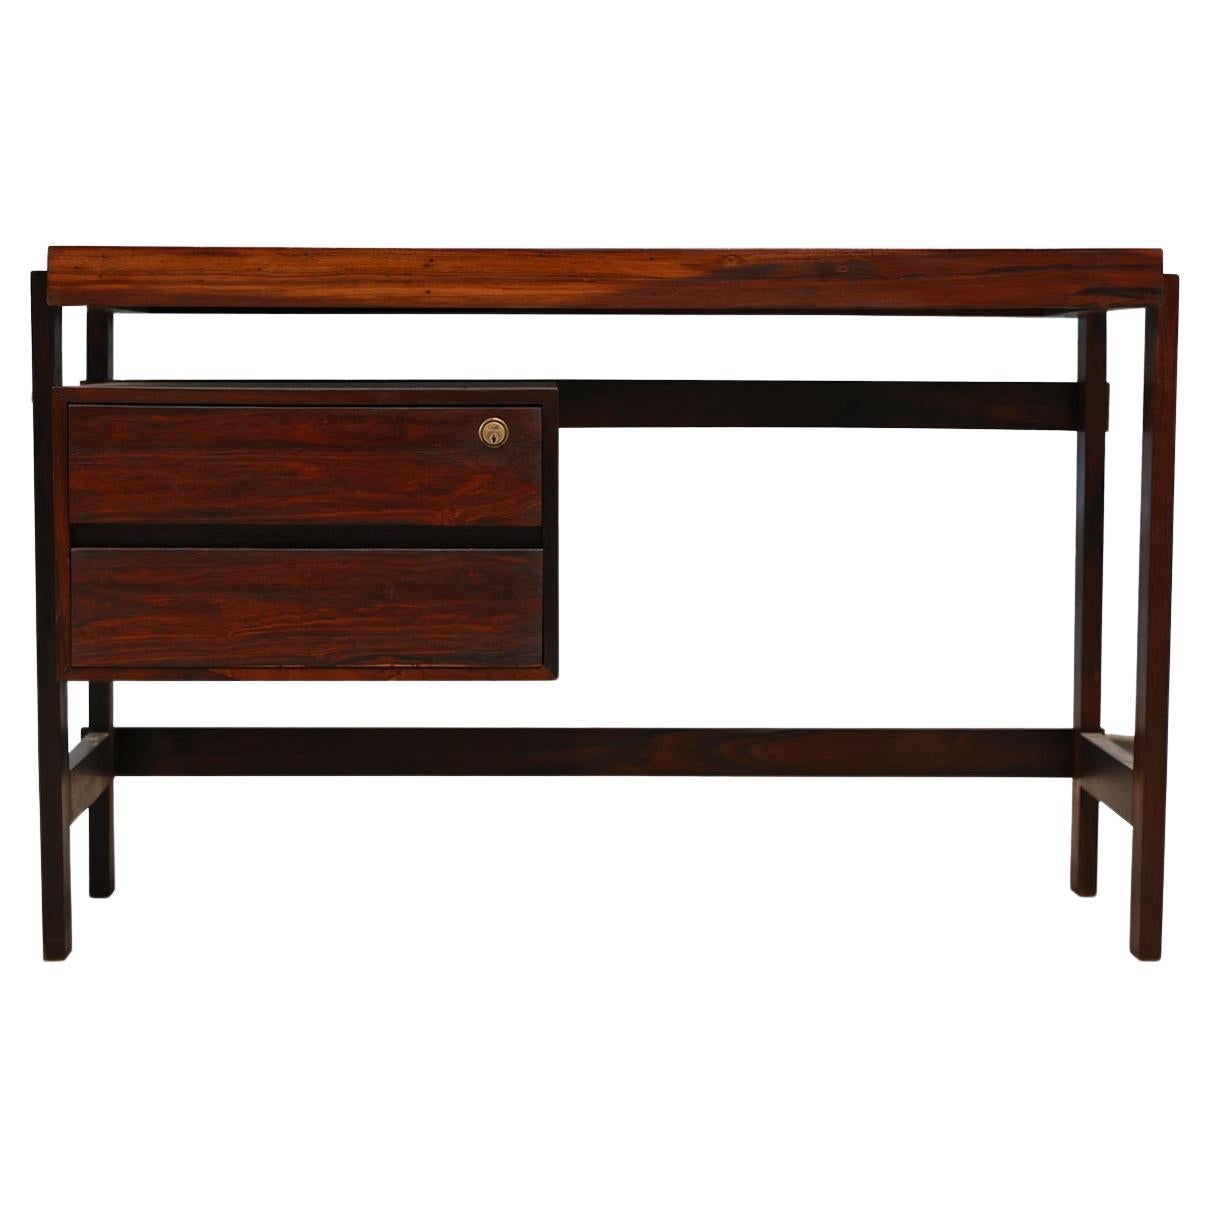 Desk in Hardwood with Two Shelves by Fatima, 1960s, Brazil